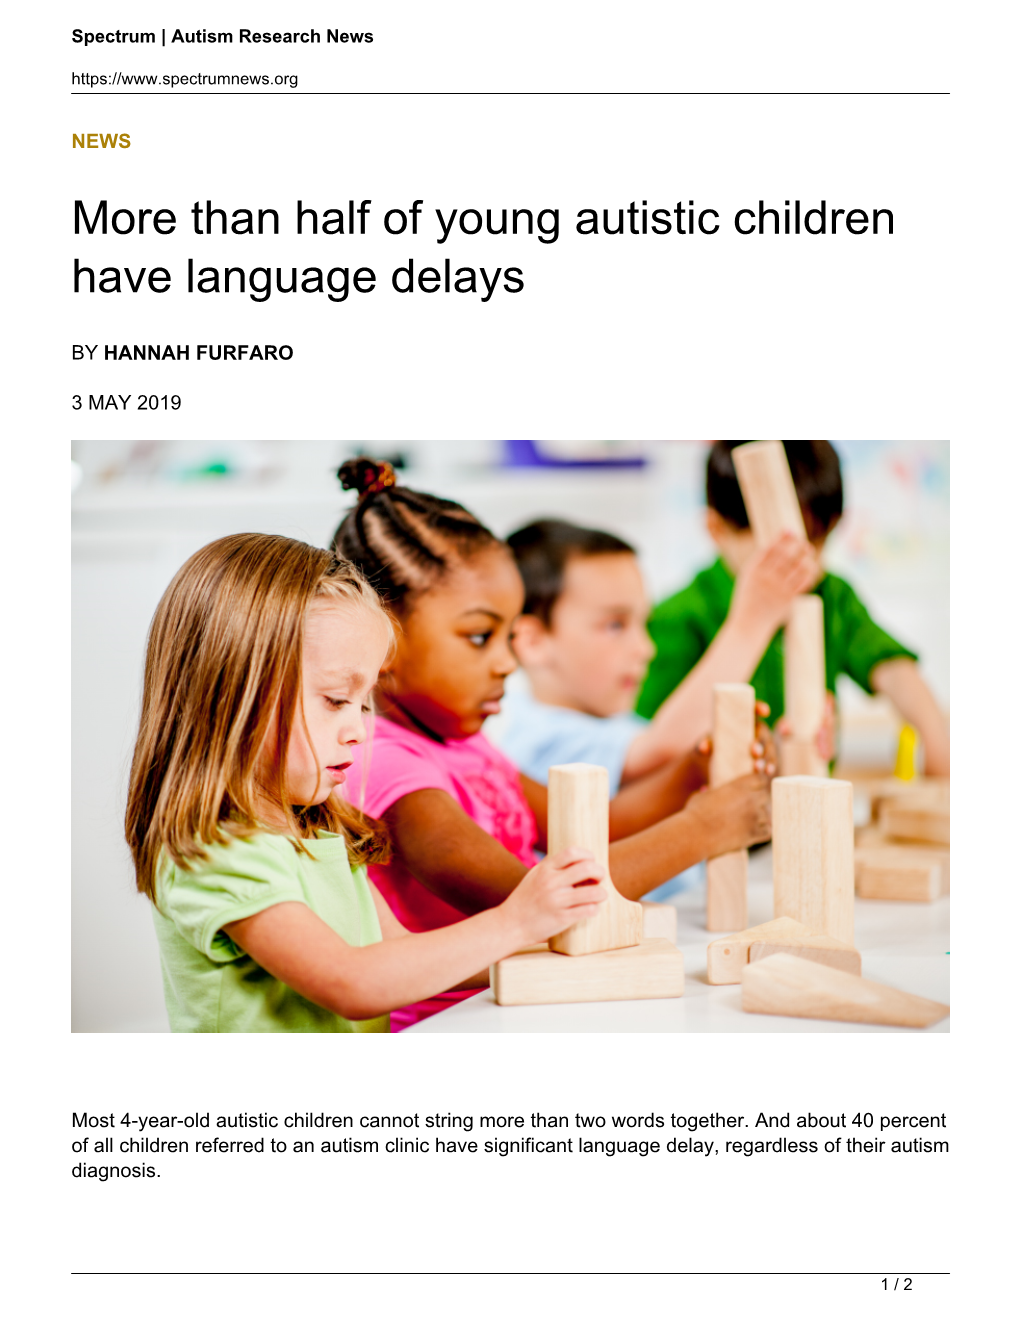 Than Half of Young Autistic Children Have Language Delays